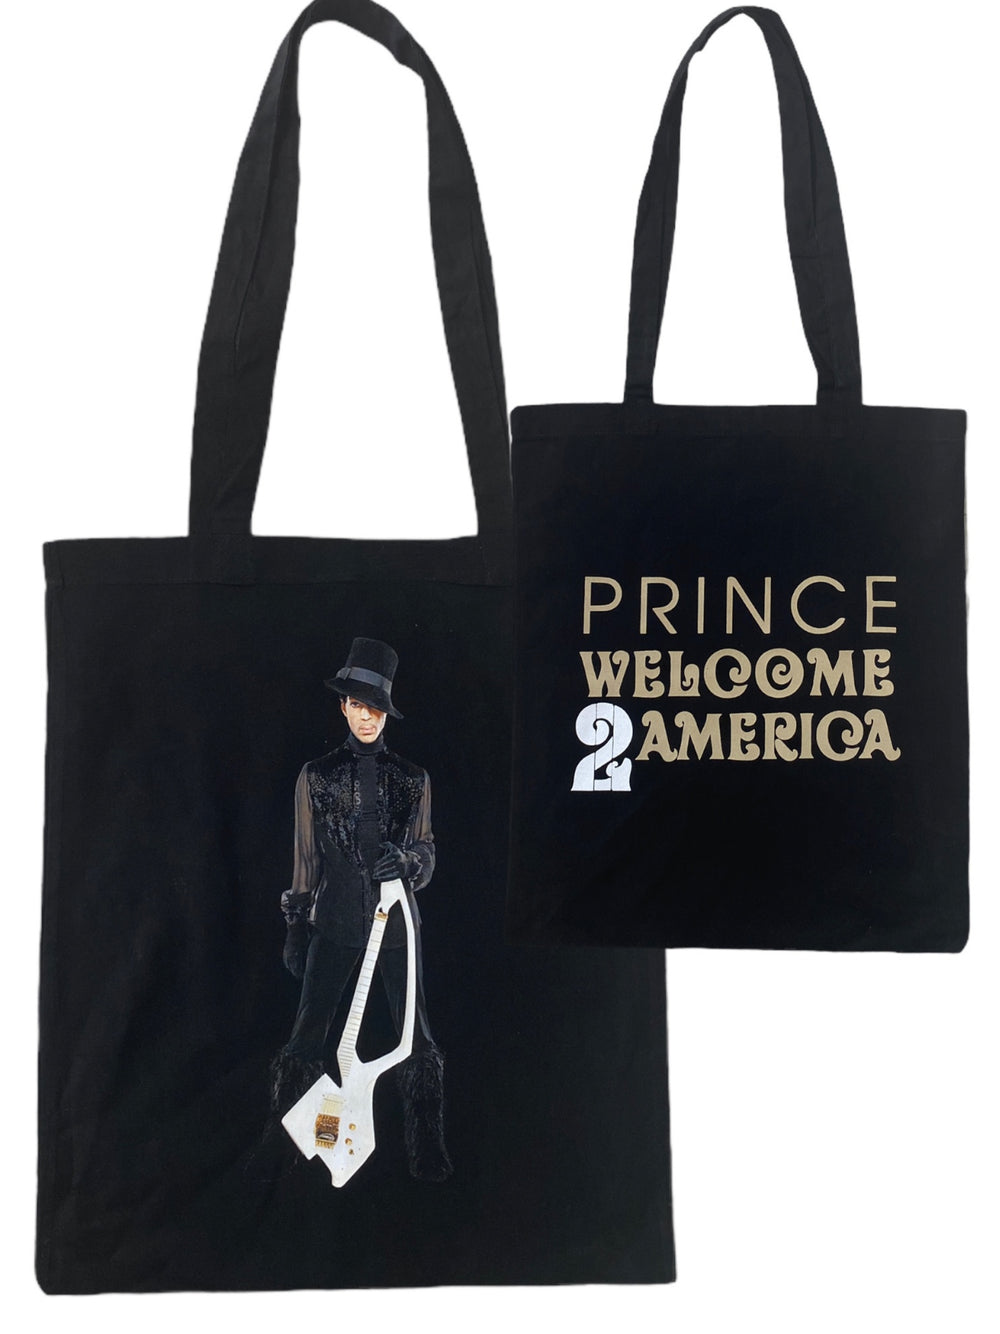 Prince – Welcome 2 America Official Merchandise Tote Bag Printed Both Sides